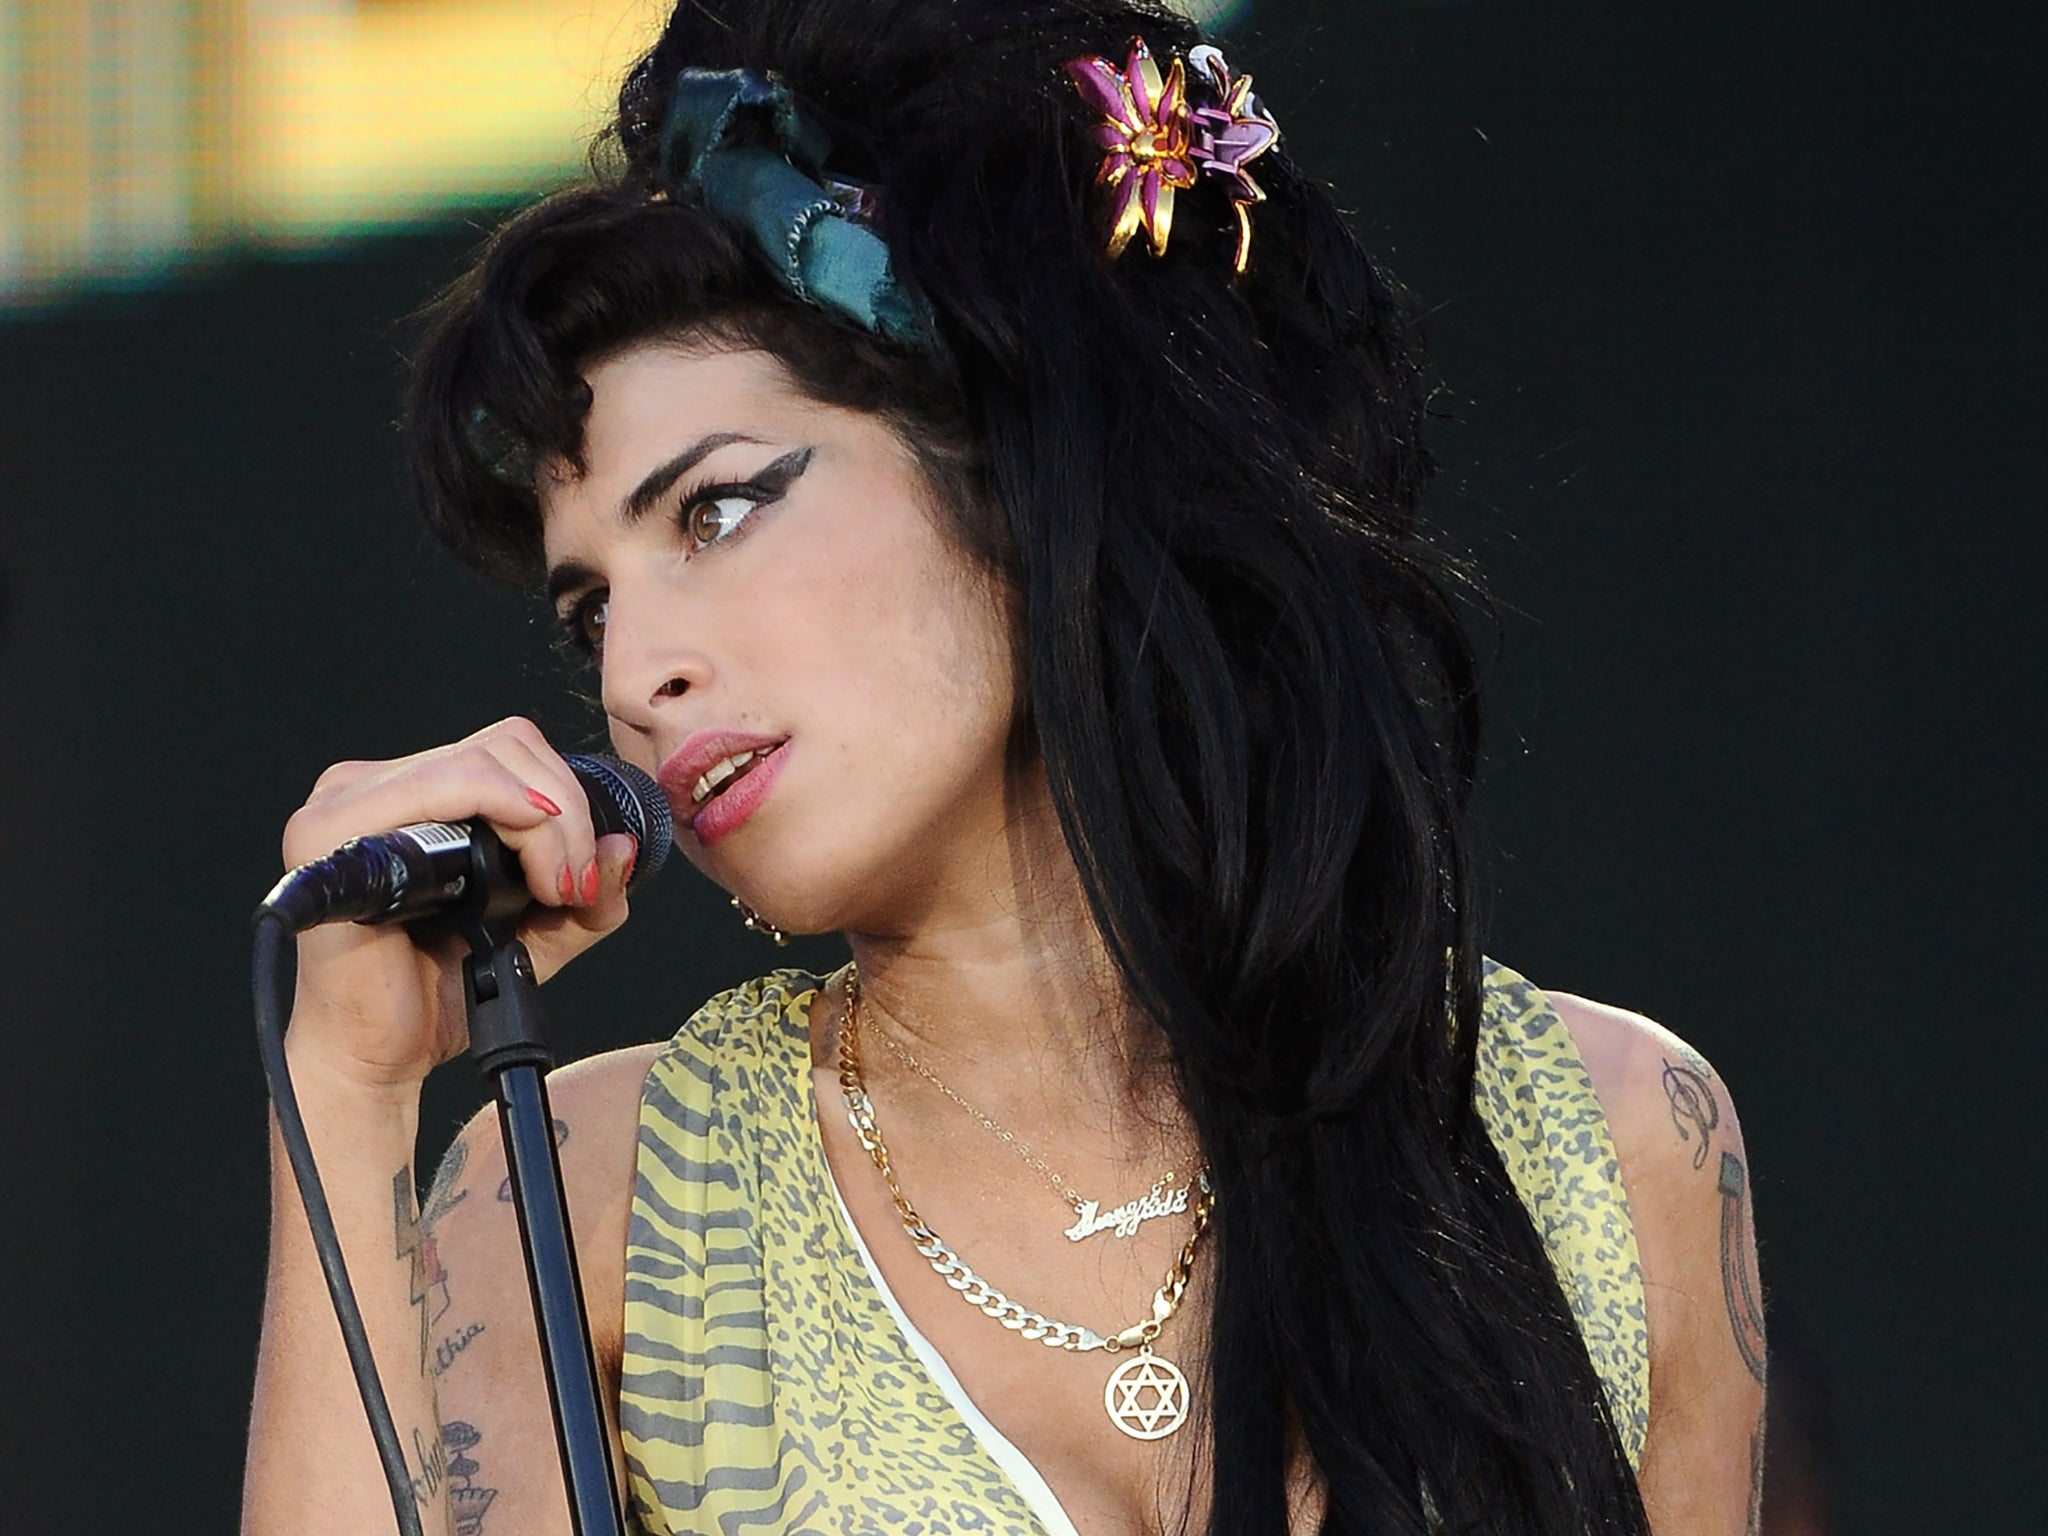 The late Amy Winehouse